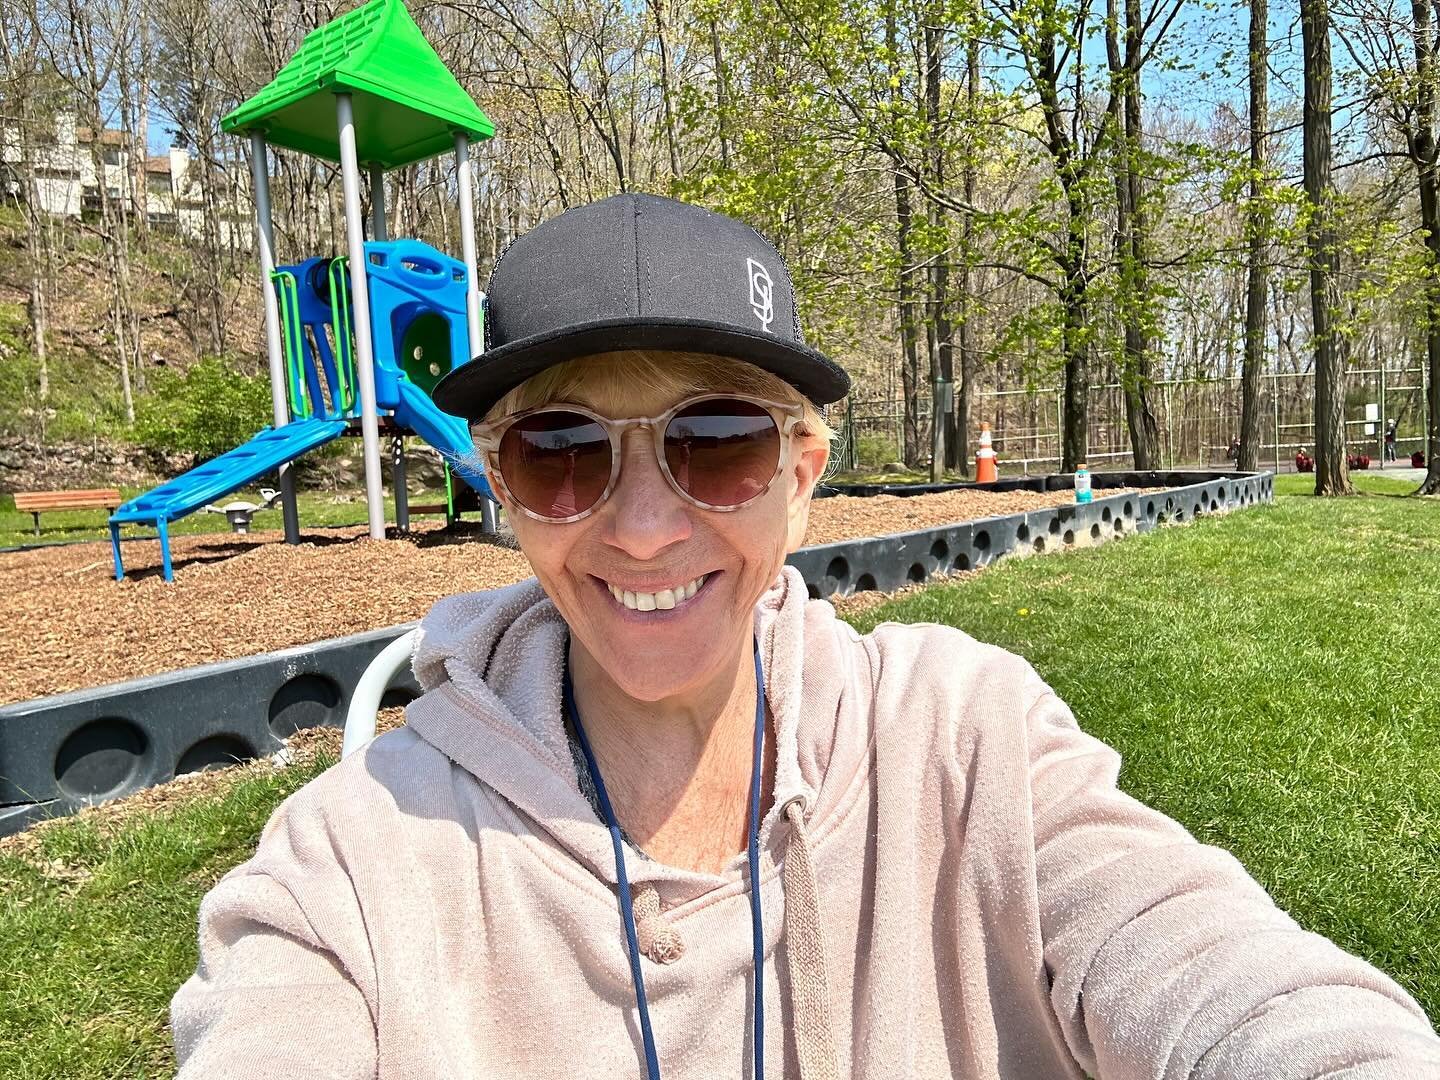 Sunday morning. Somewhere people are at brunch sipping  mimosas, awaiting their eggs Benedict before taking a leisurely stroll in the park 🩷🩷🩷 NOT ME. I&rsquo;m in workouts clothes, looking like a deranged unibomber at a ballpark hoping someone br